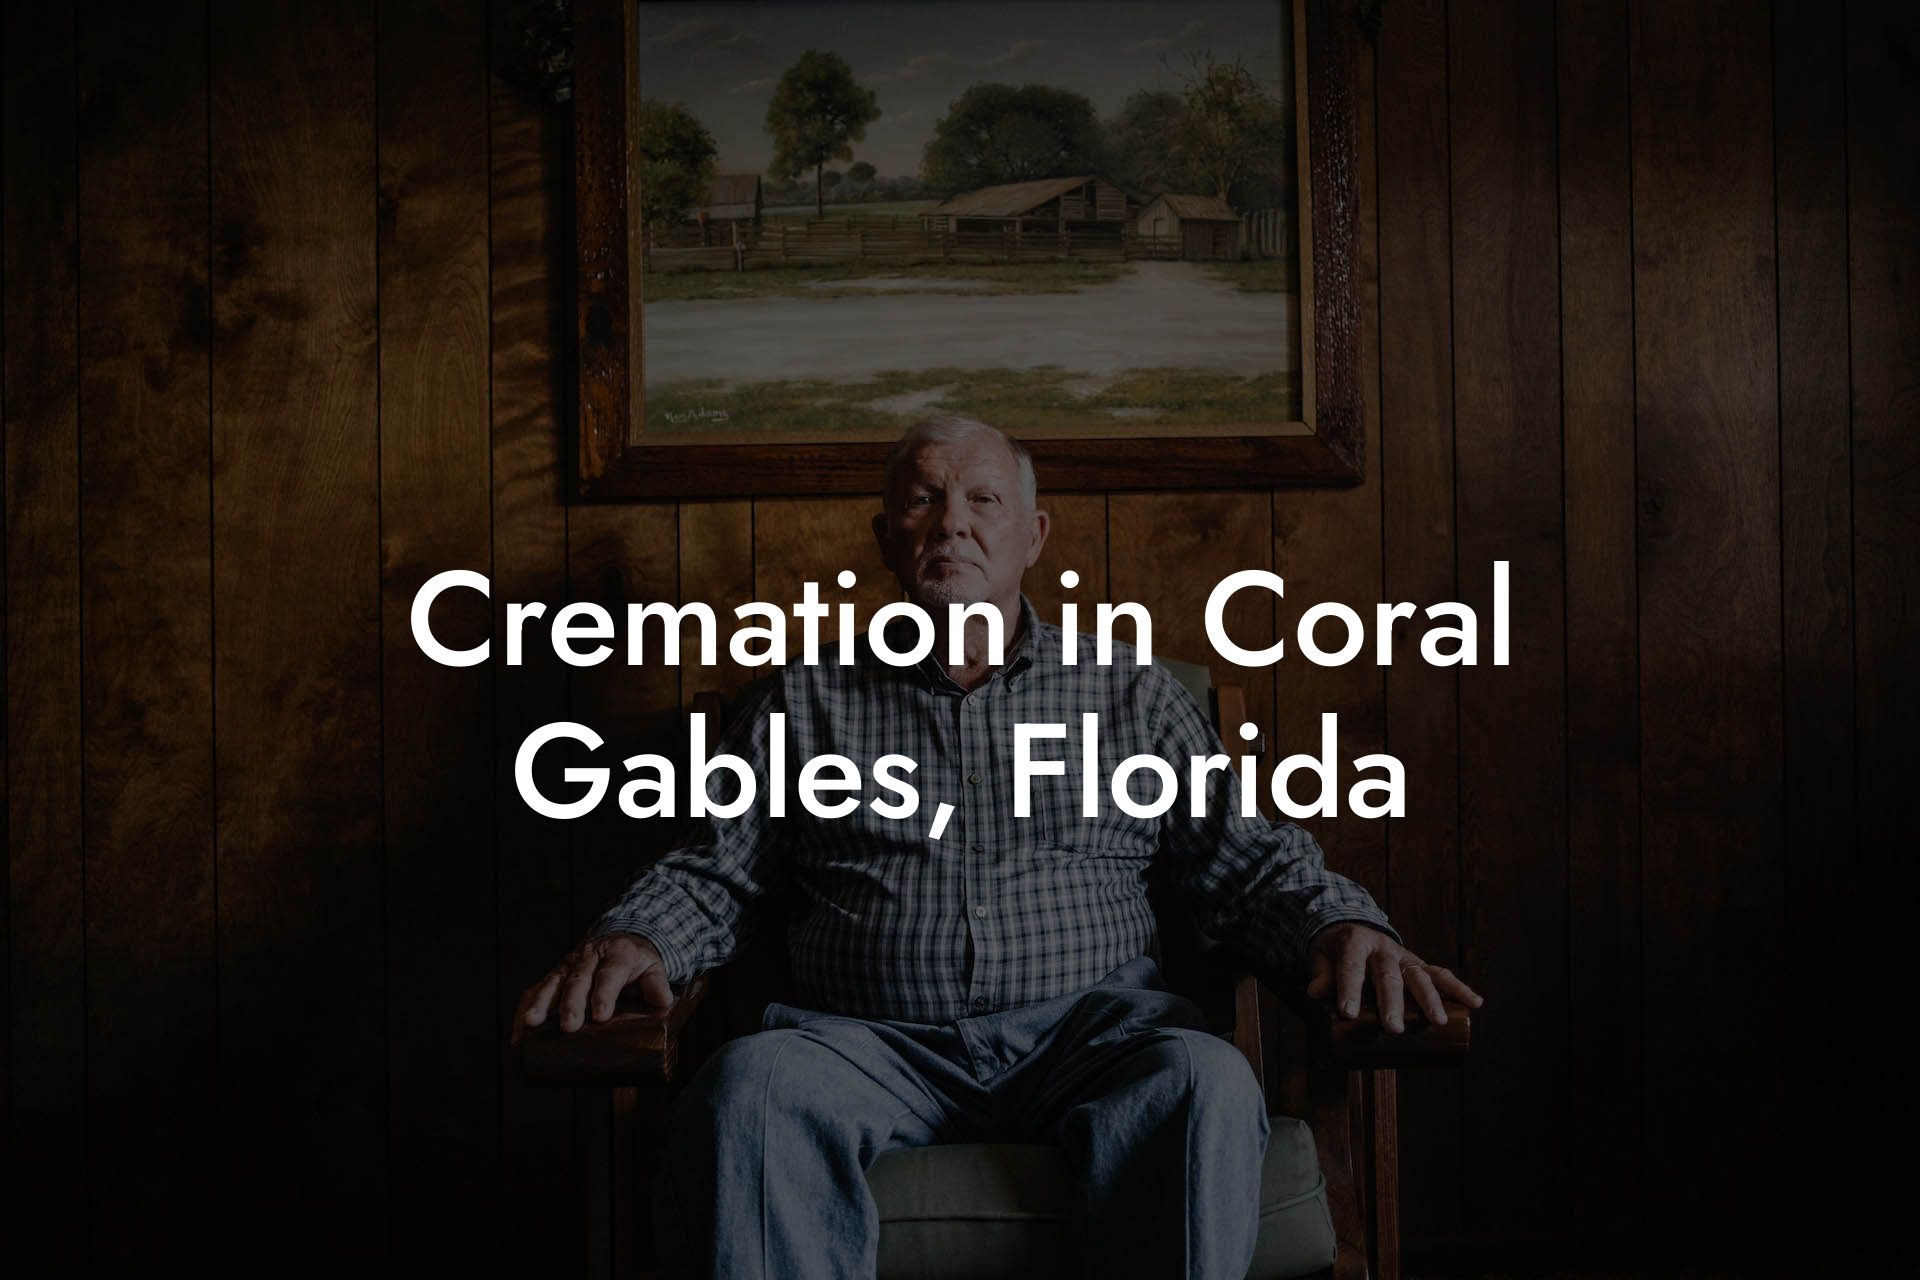 Cremation in Coral Gables, Florida